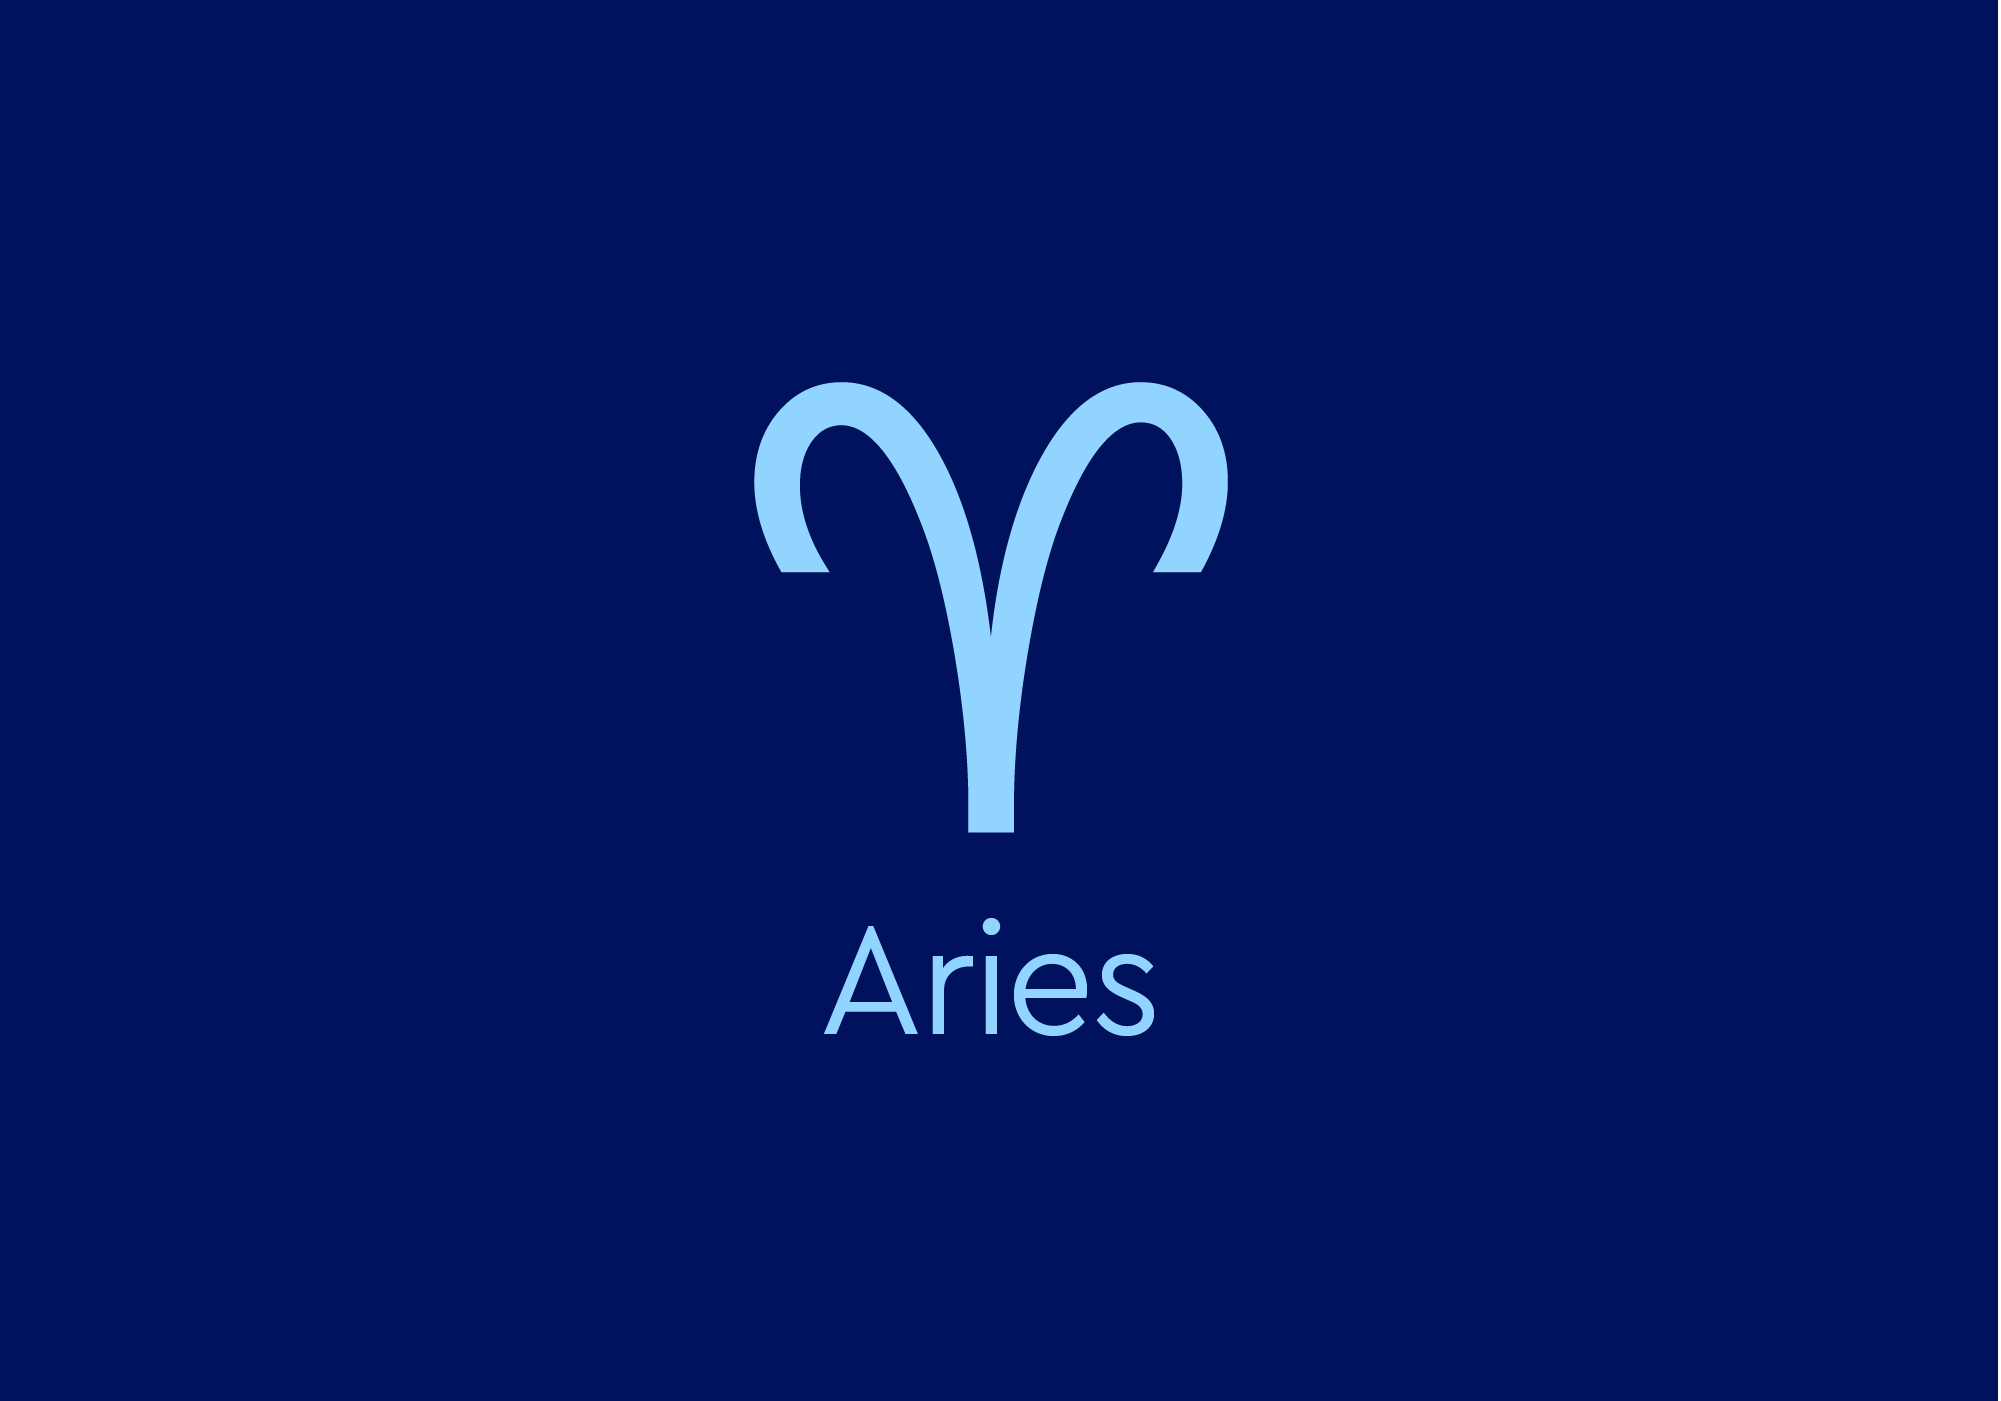 Quiz On Traits And Facts About Aries